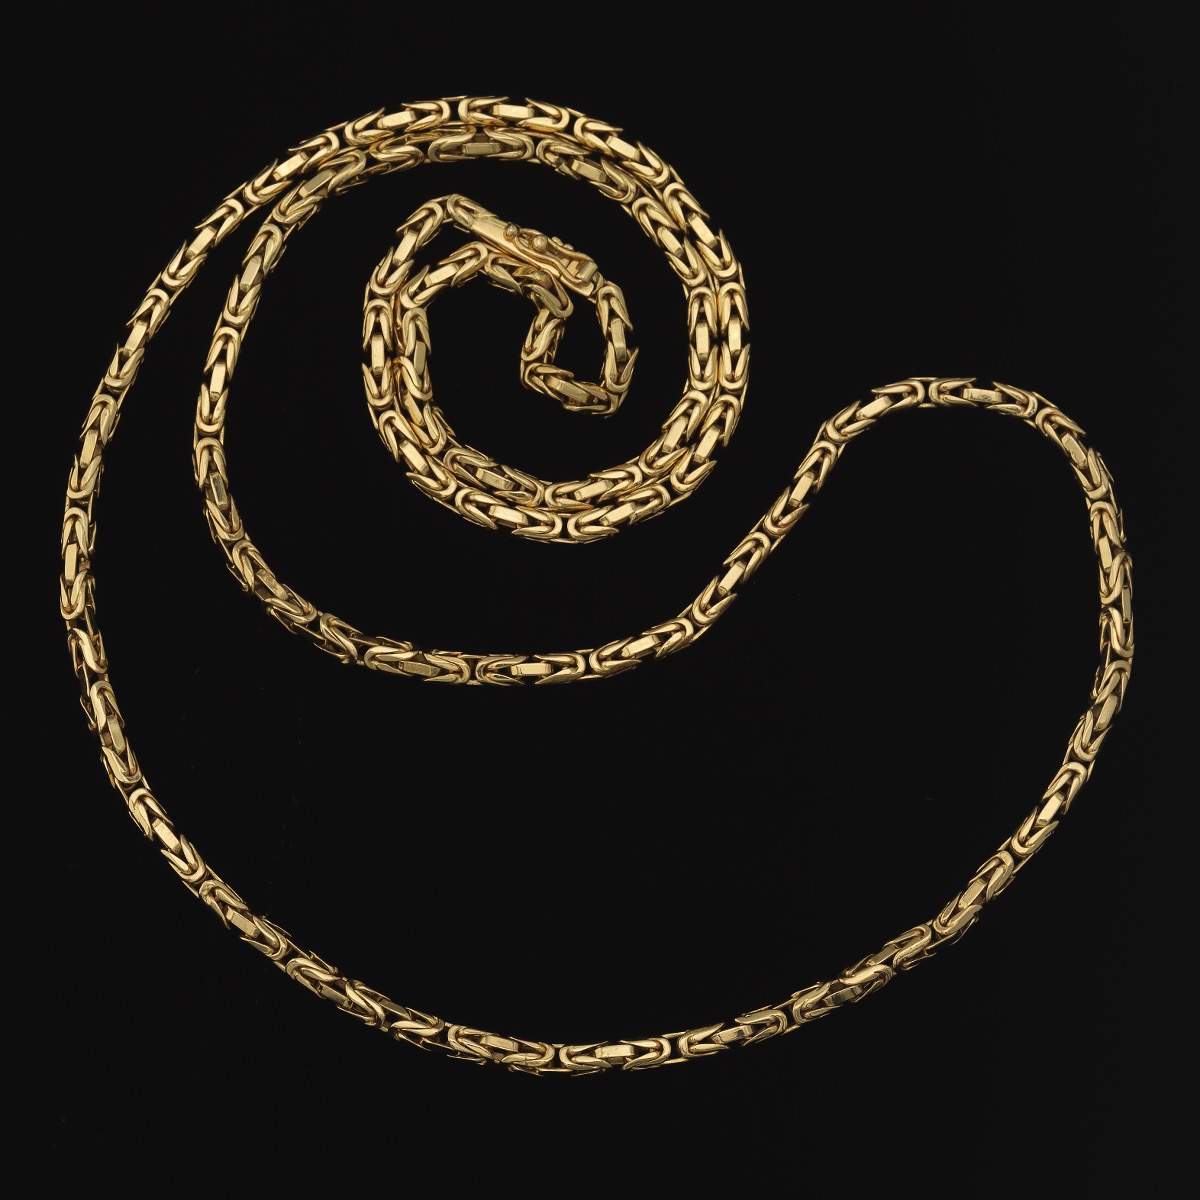 Gold Byzantine Chain Necklace Signed "Piaget"